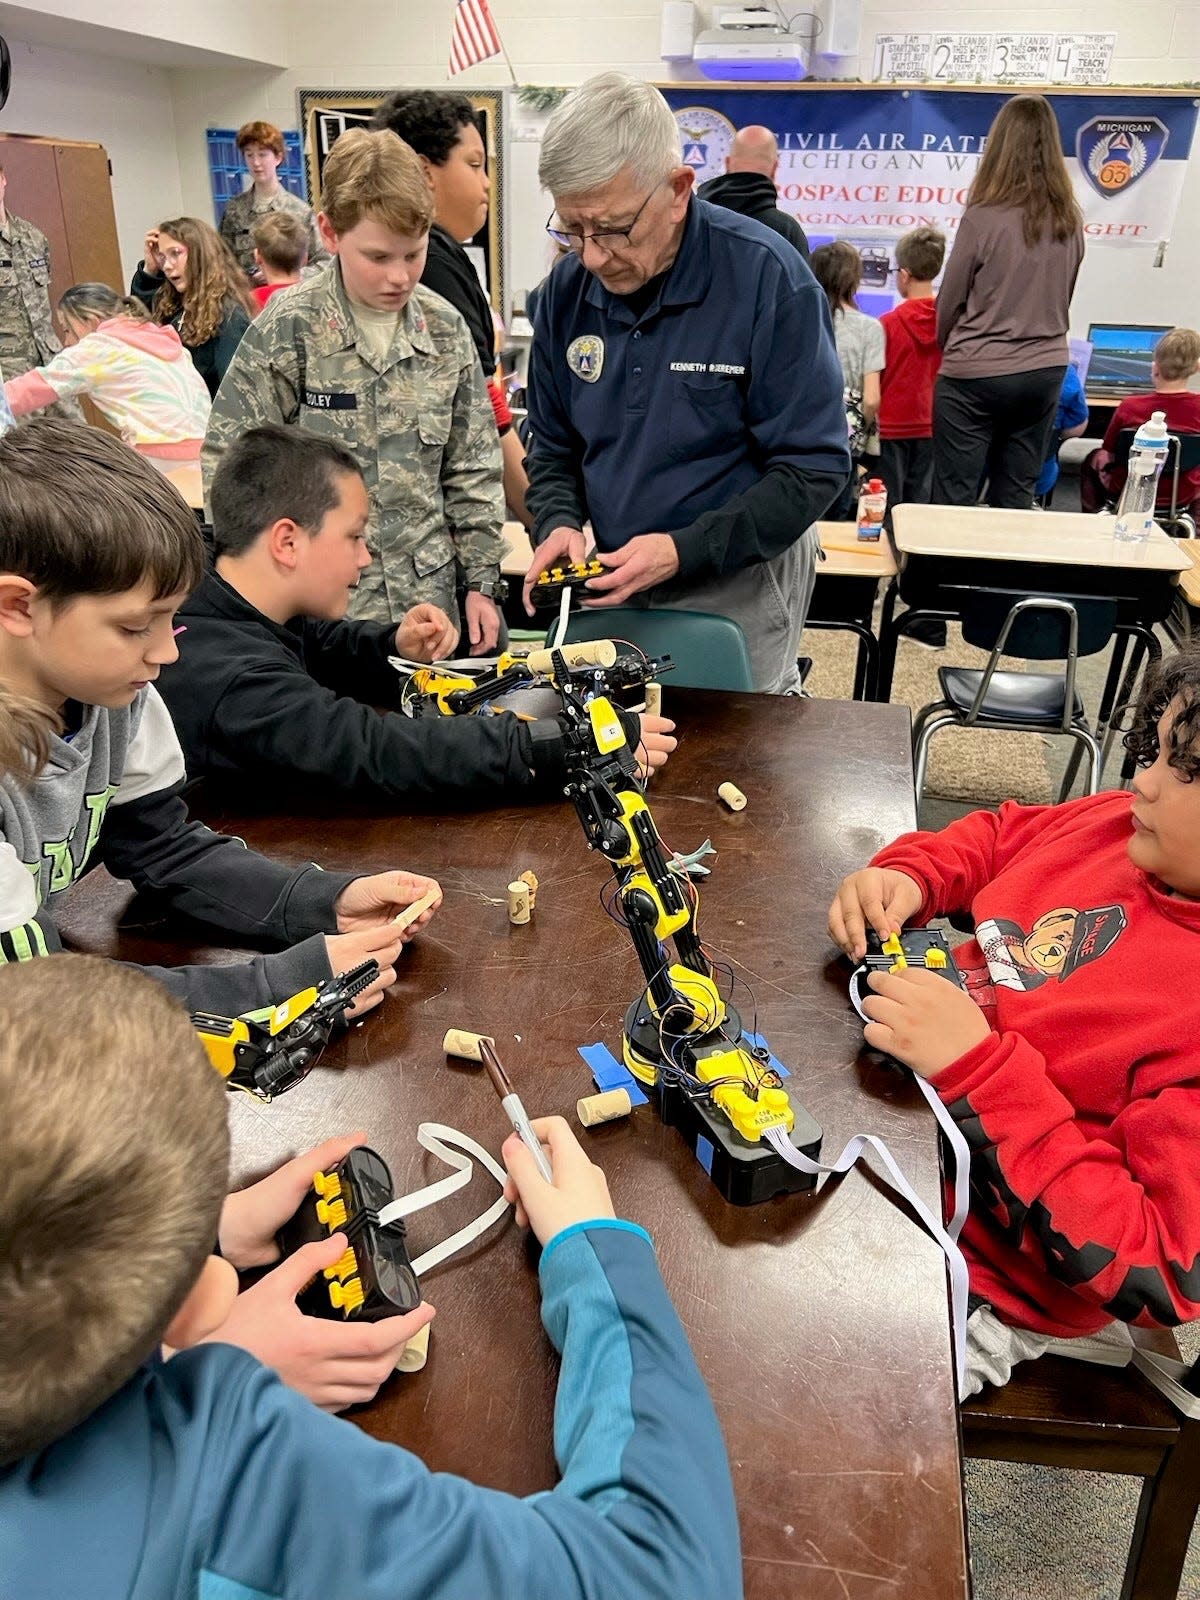 Prairie Elementary School in Adrian will partner with the Adrian Civil Air Patrol Squadron on Thursday, May 2, on the Aerospace Connections in Education (ACE) program to introduce the elementary students to science, technology, engineering and math (STEM) careers, as well as those careers involving aviation.